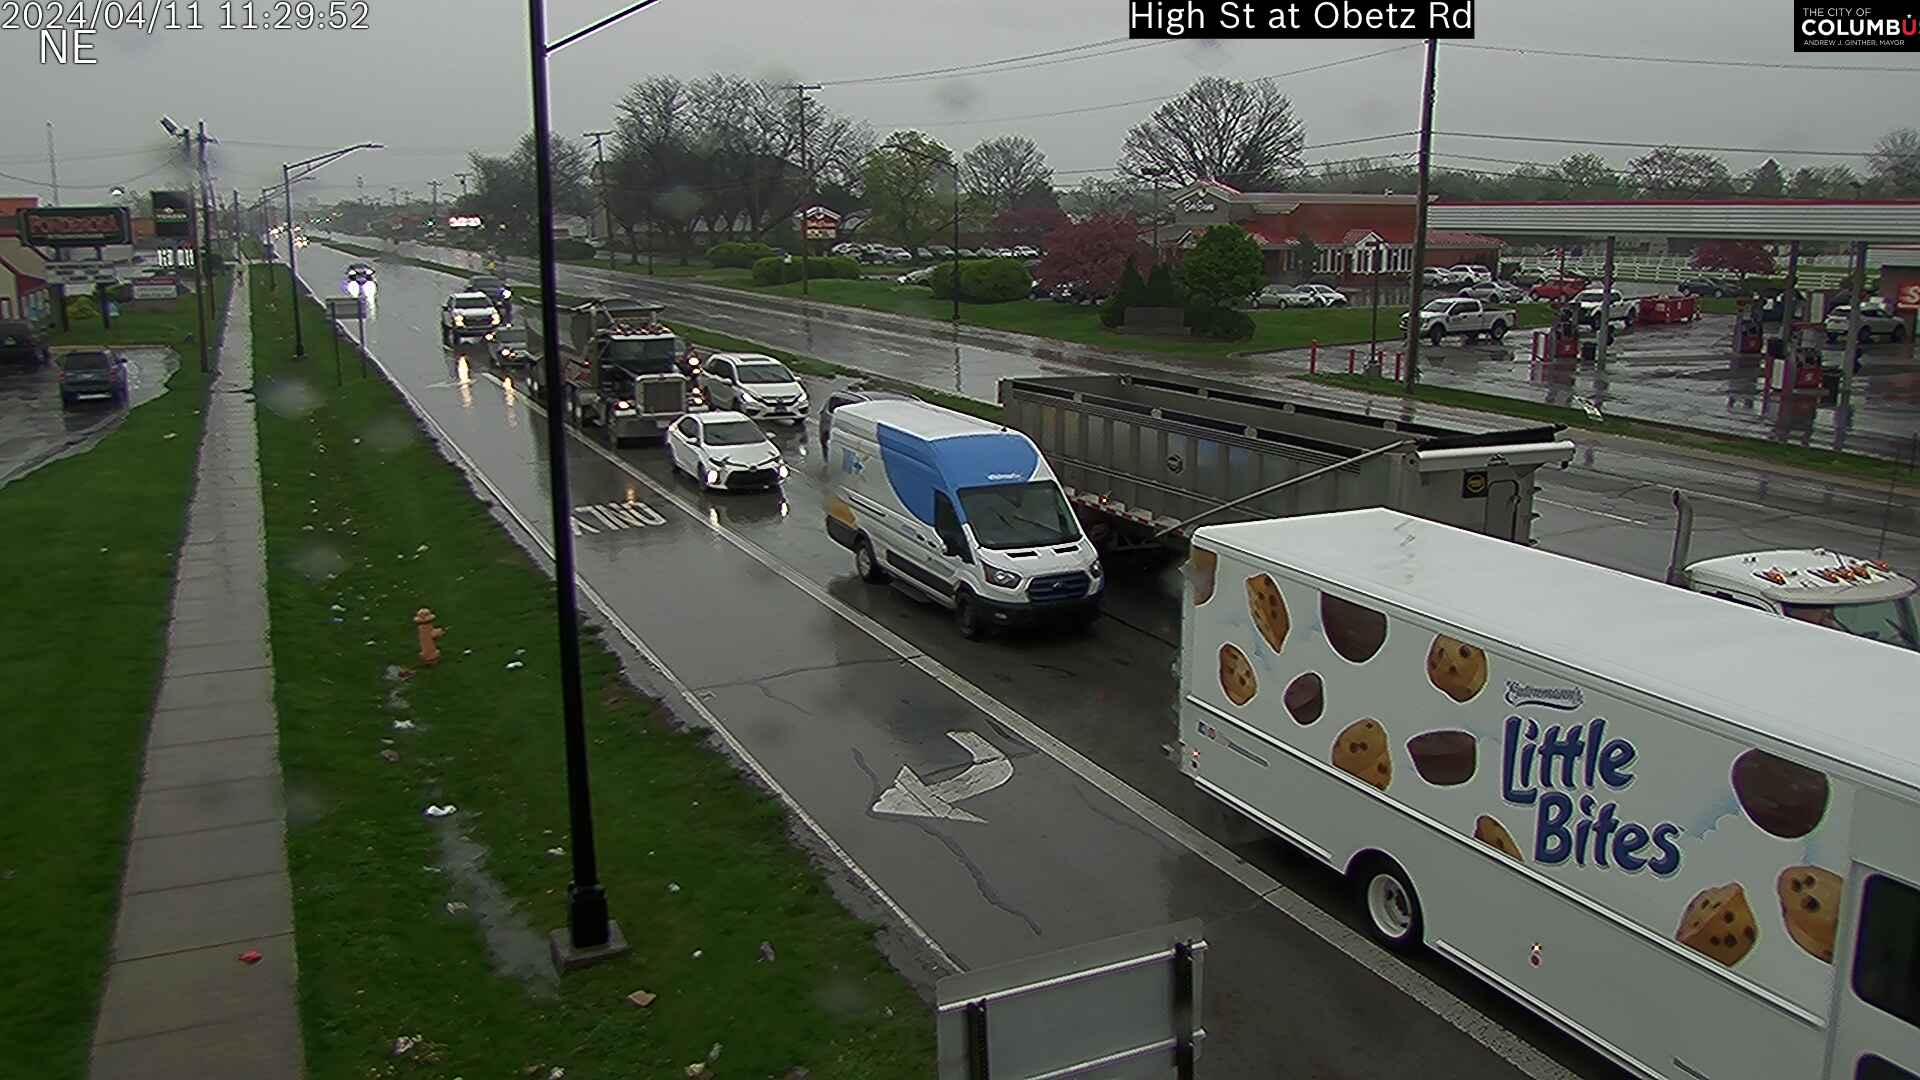 Traffic Cam Hamilton Meadows: City of Columbus) High St at Obetz Rd Player